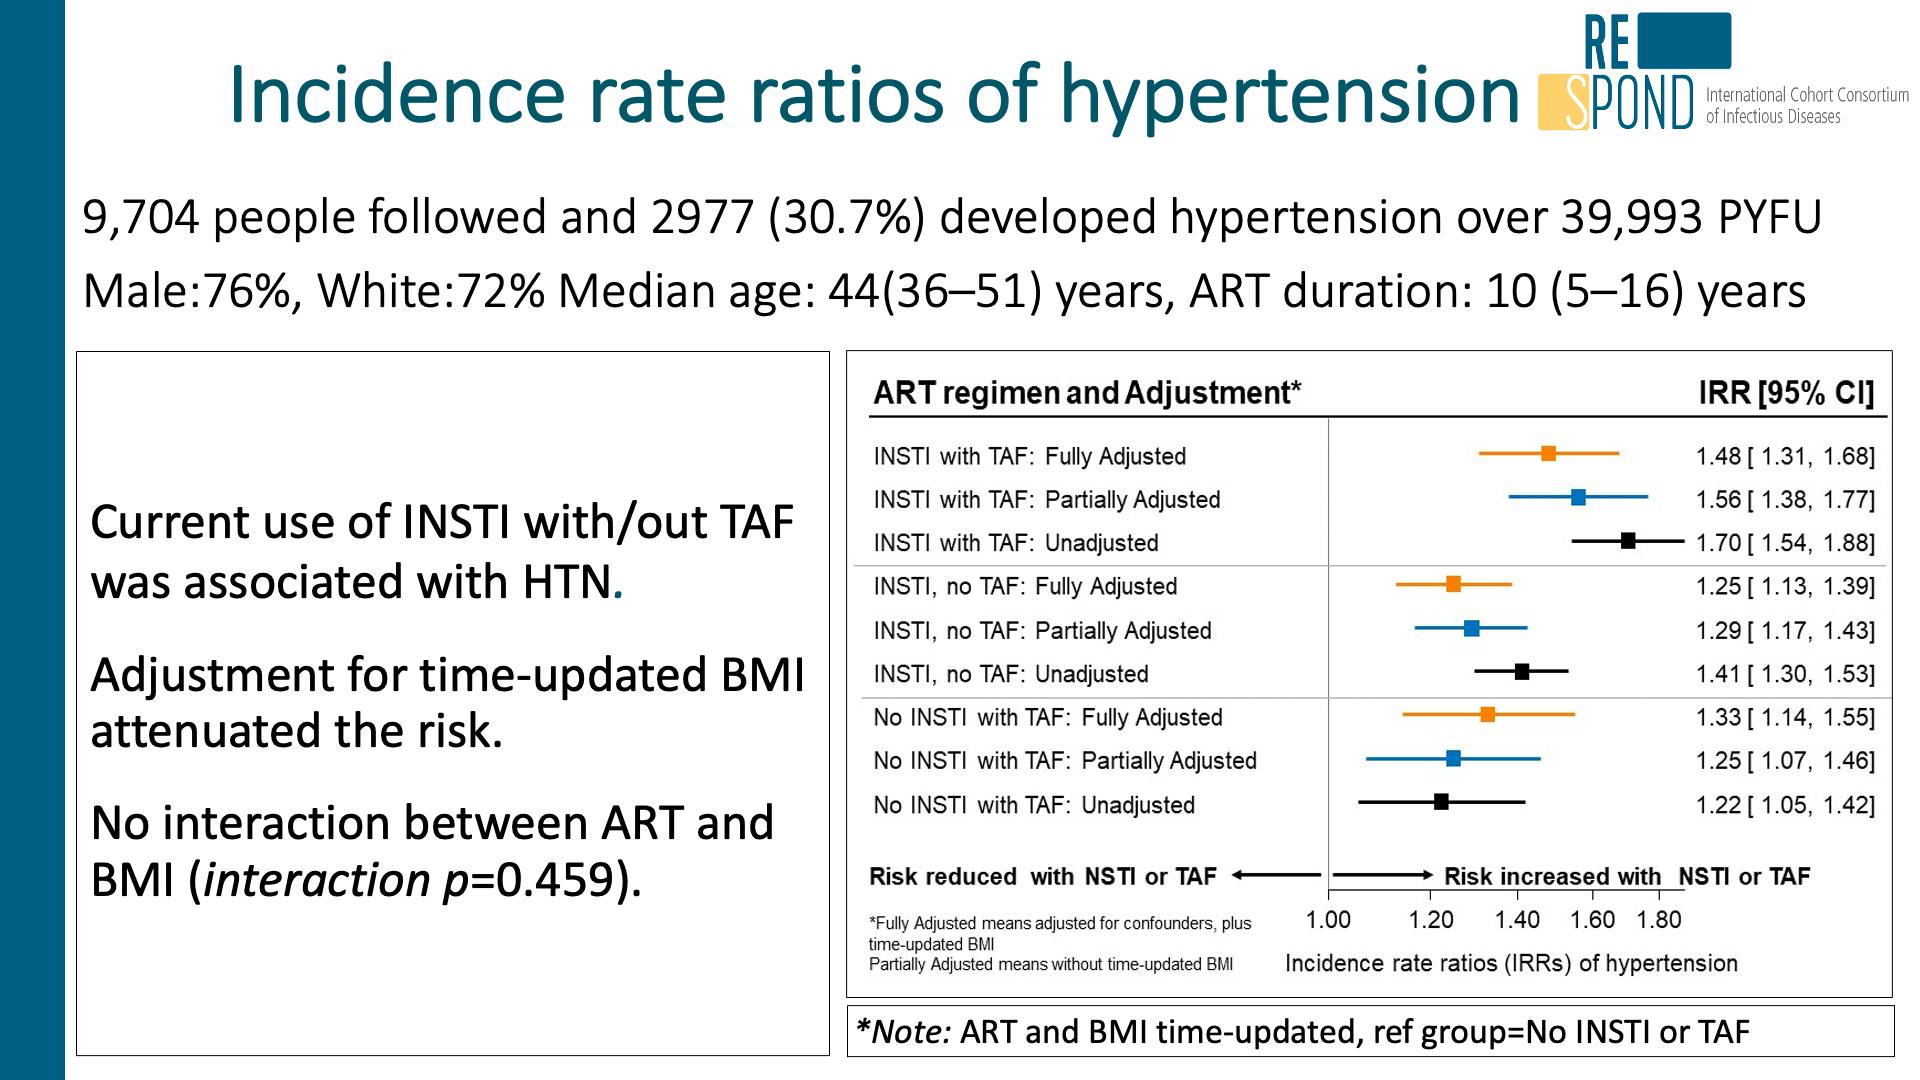 Incidence rate ratios of hyperteension